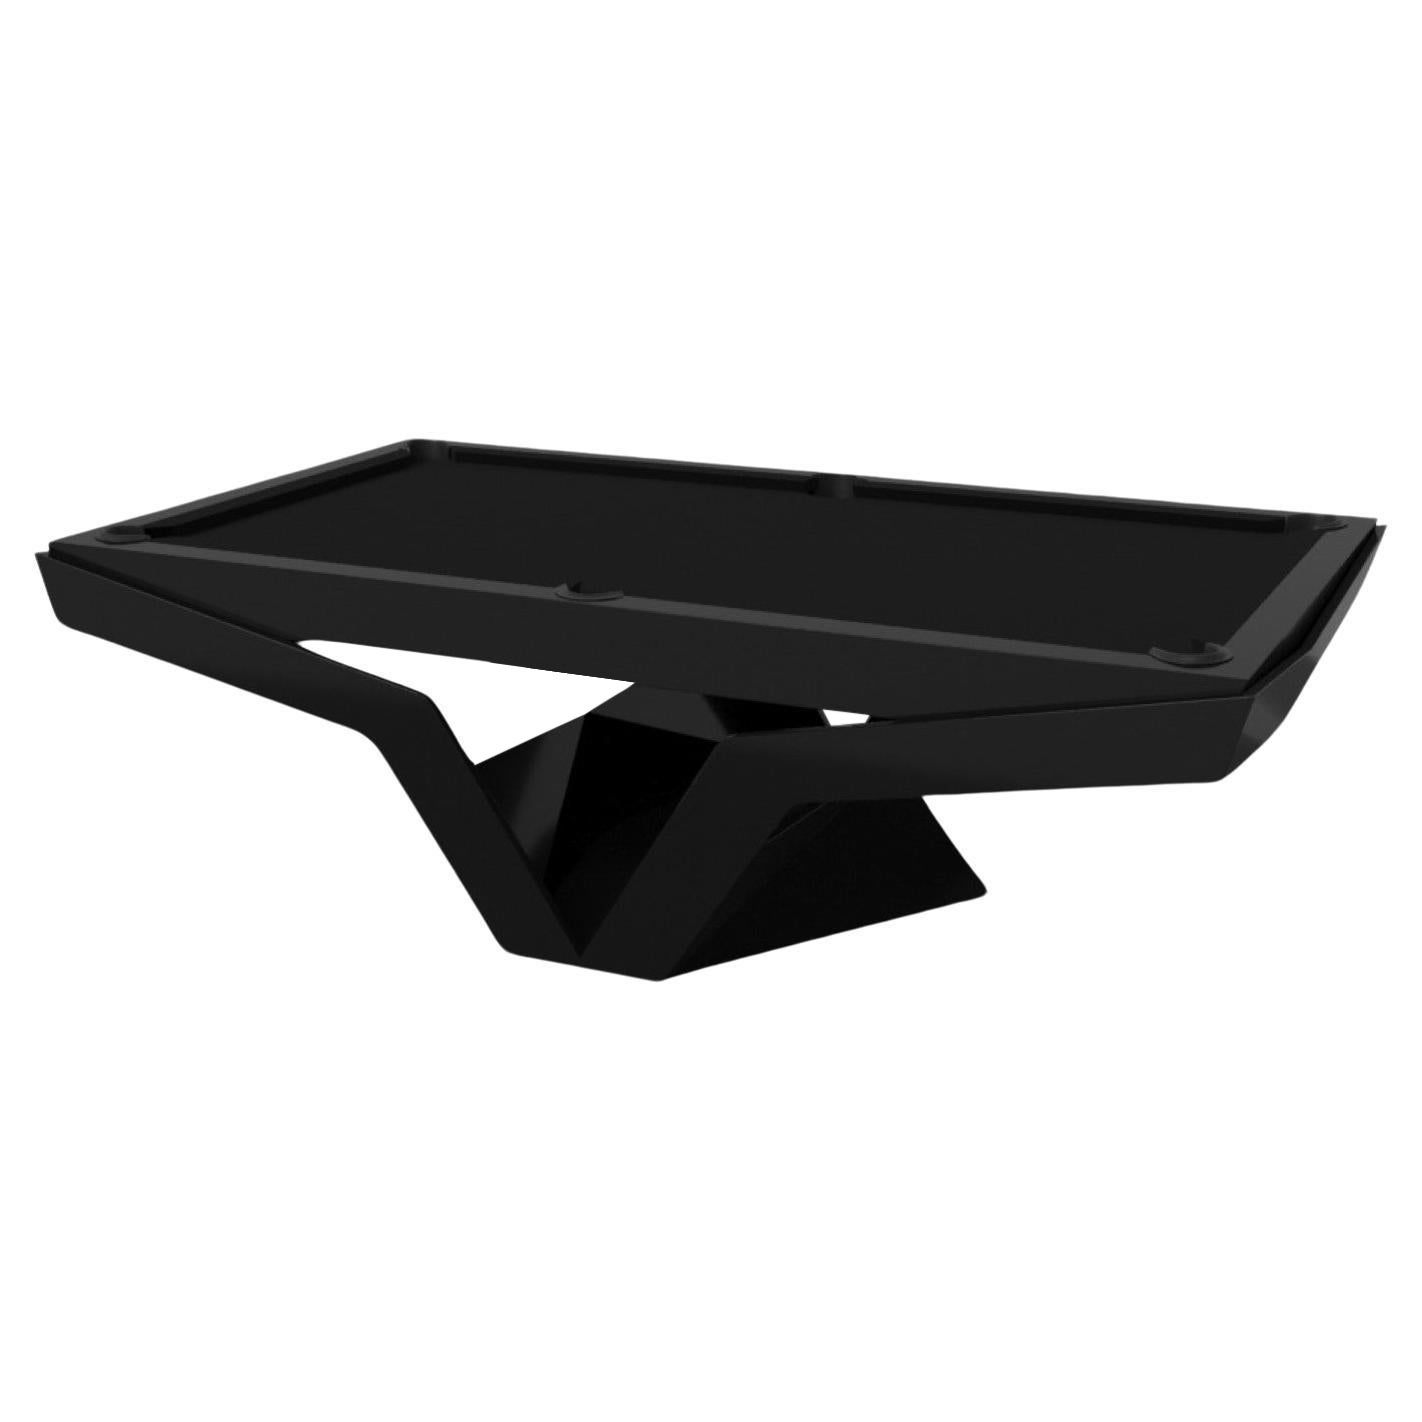 Elevate Customs Enzo Pool Table / Solid Pantone Black Color in 9' - Made in USA For Sale